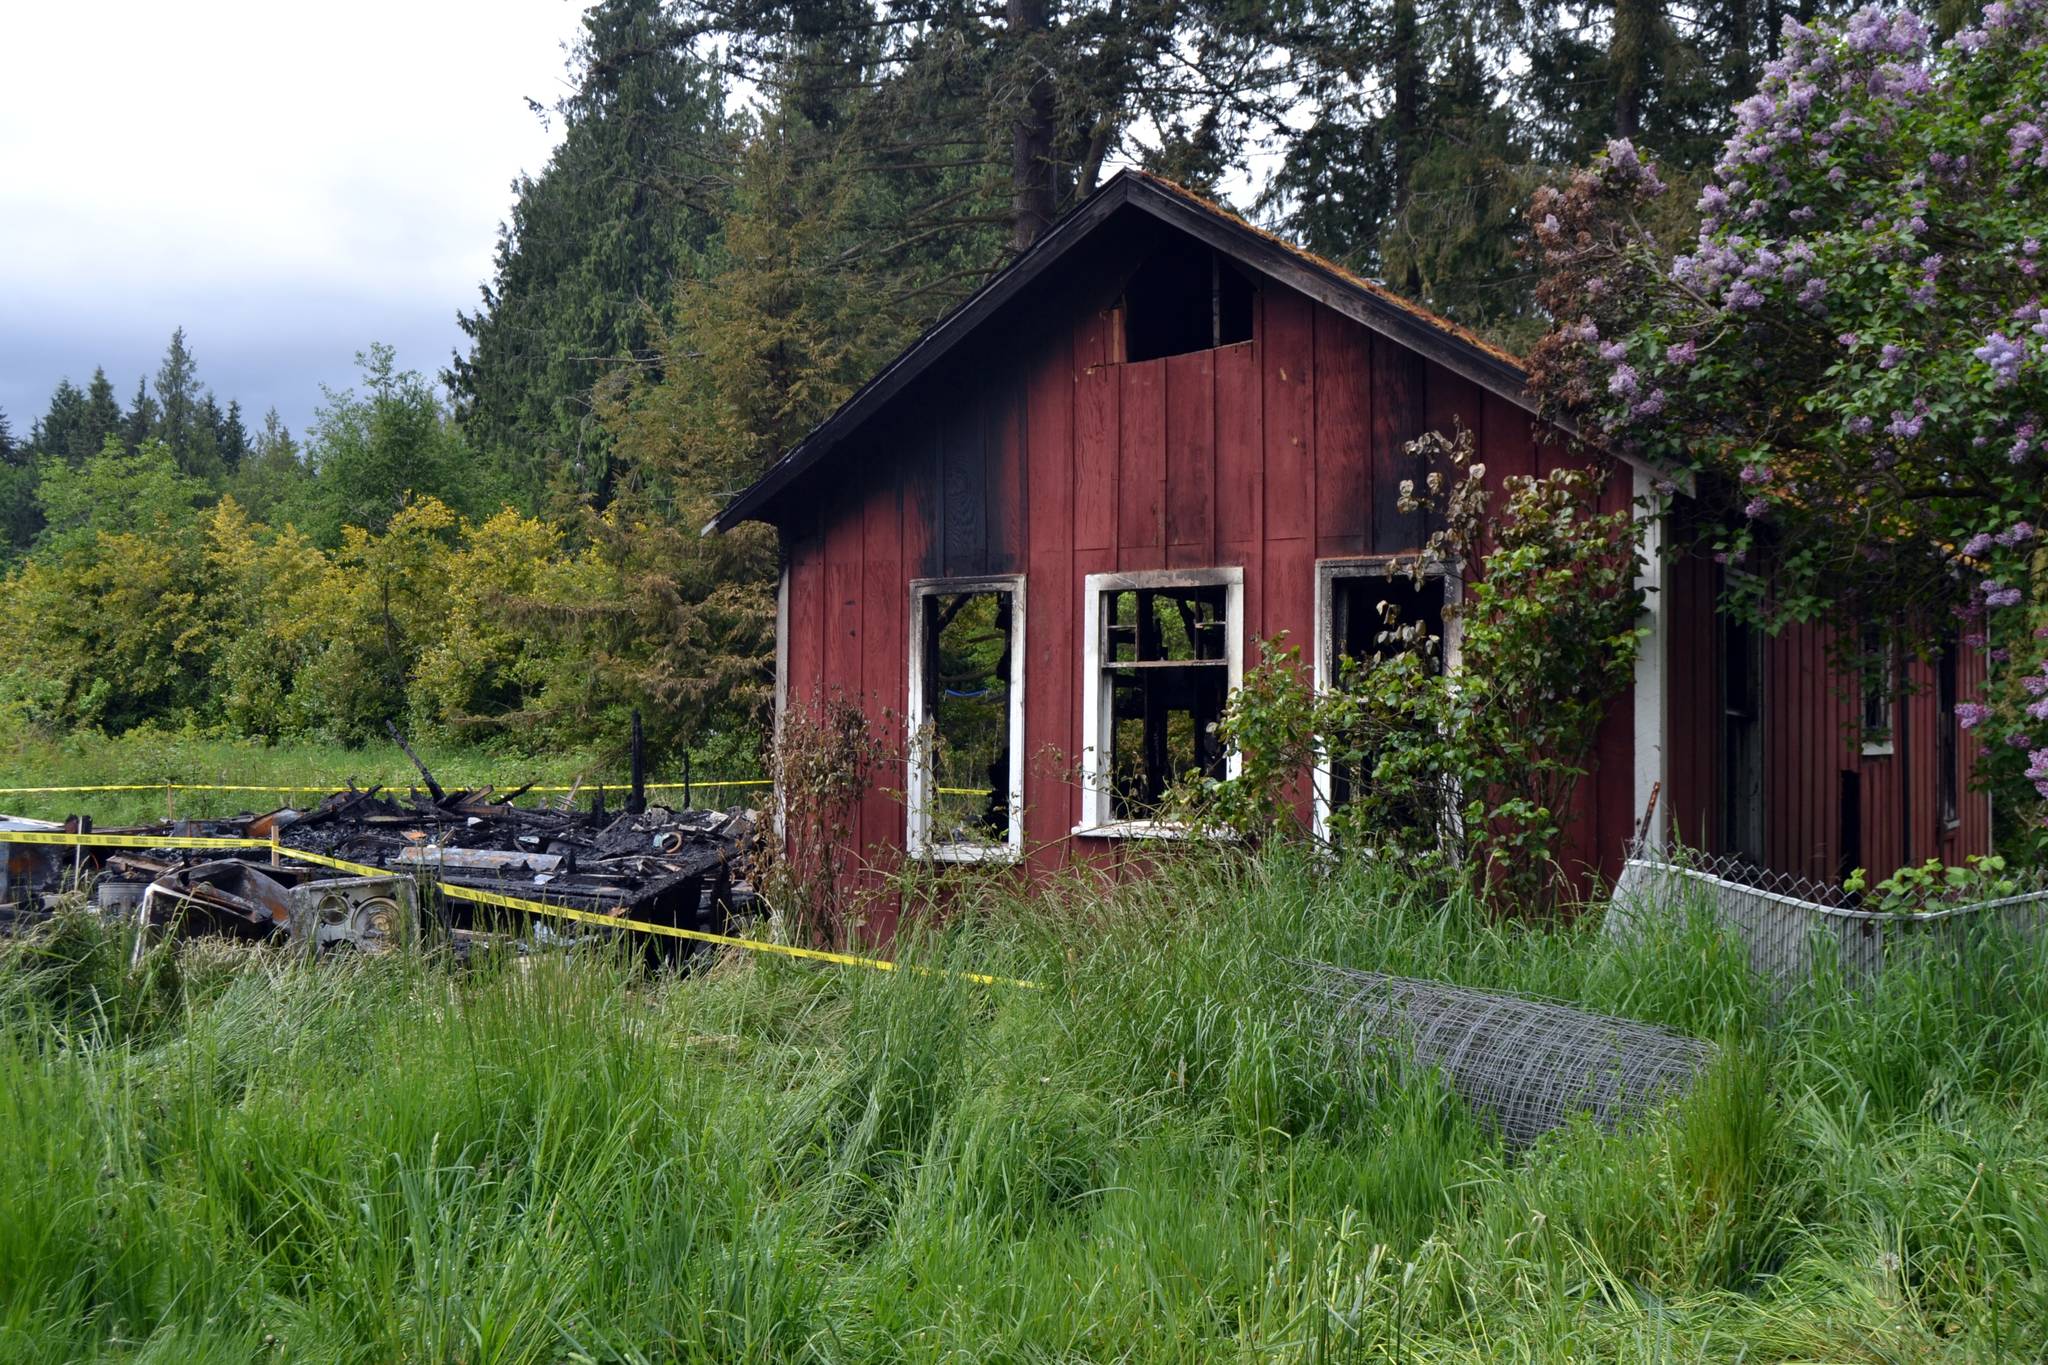 Assistant Fire Chief Tony Hudson with Clallam County Fire District 3 said firefighters responded twice to this house for fires between May 12-13. Sequim Gazette photo by Matthew Nash